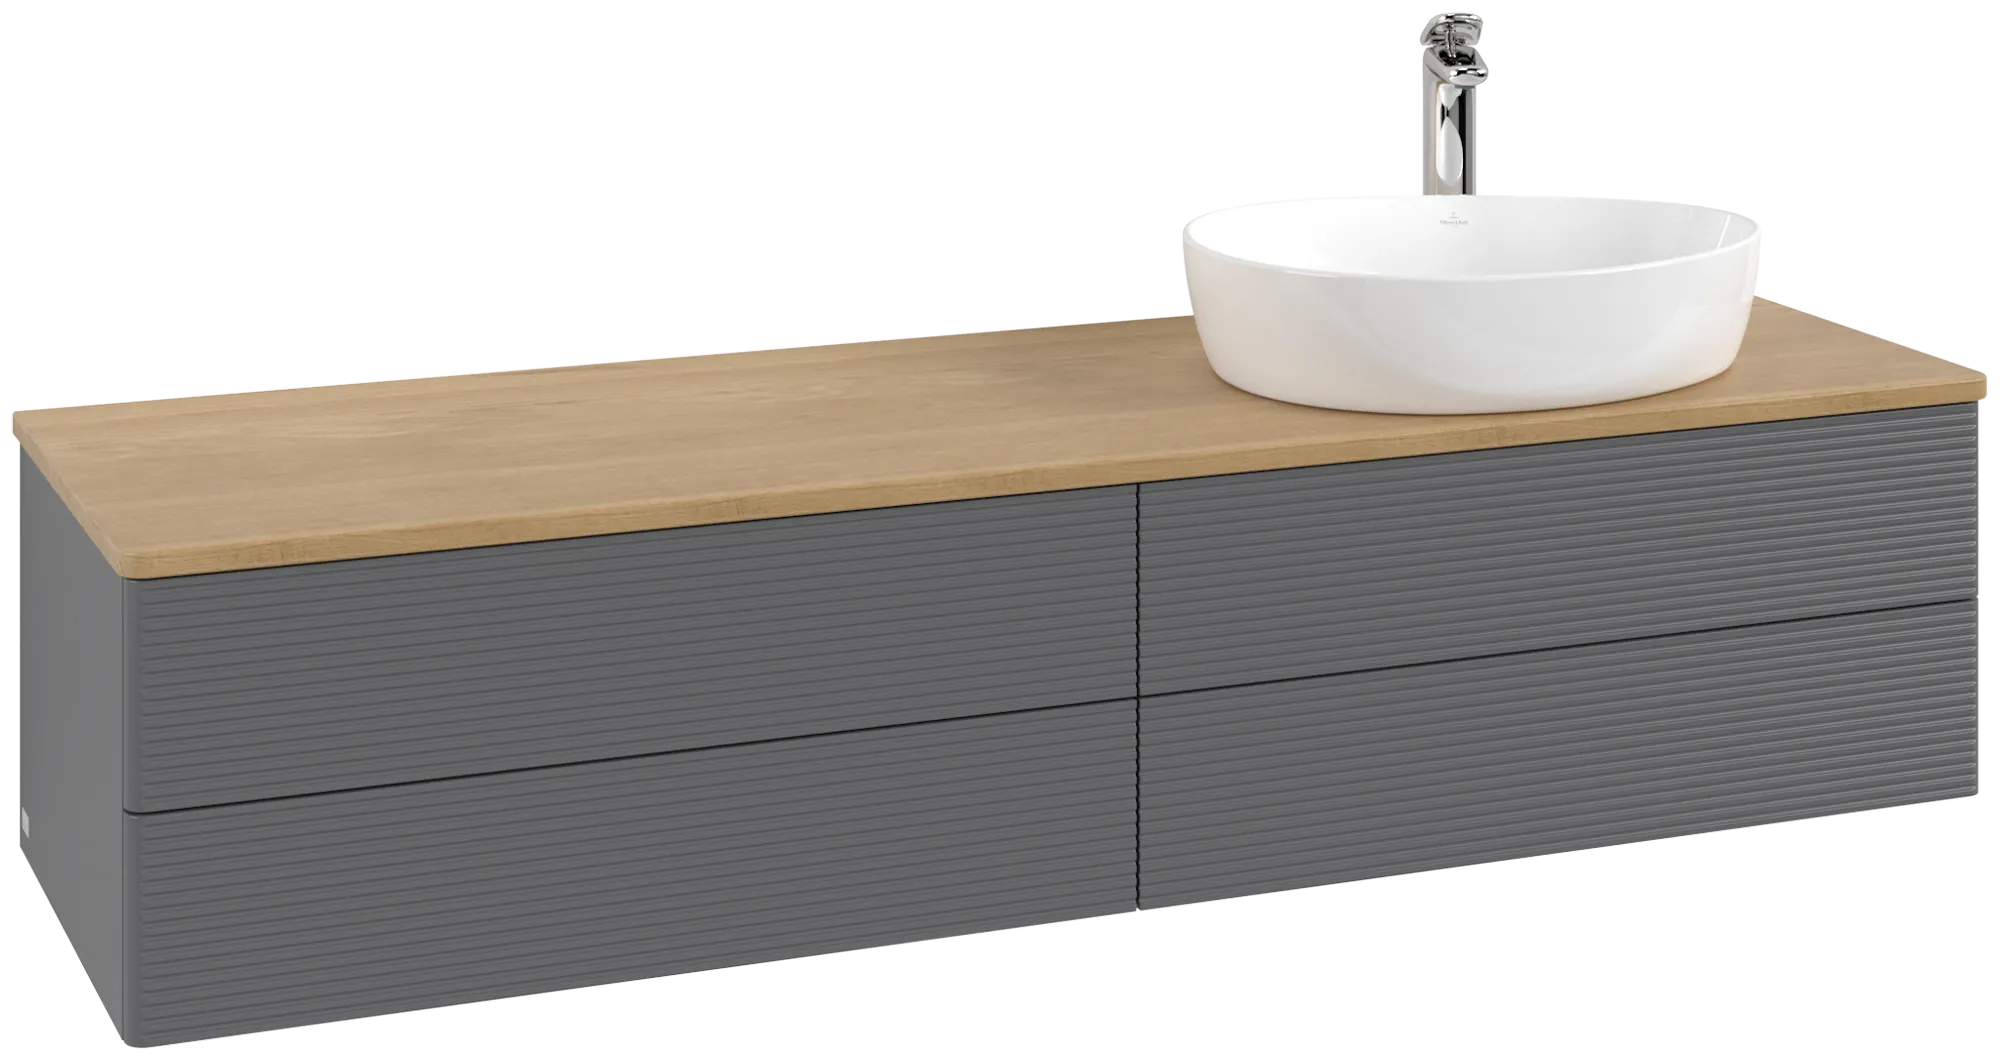 Picture of VILLEROY BOCH Antao Vanity unit, 4 pull-out compartments, 1600 x 360 x 500 mm, Front with grain texture, Anthracite Matt Lacquer / Honey Oak #K27151GK